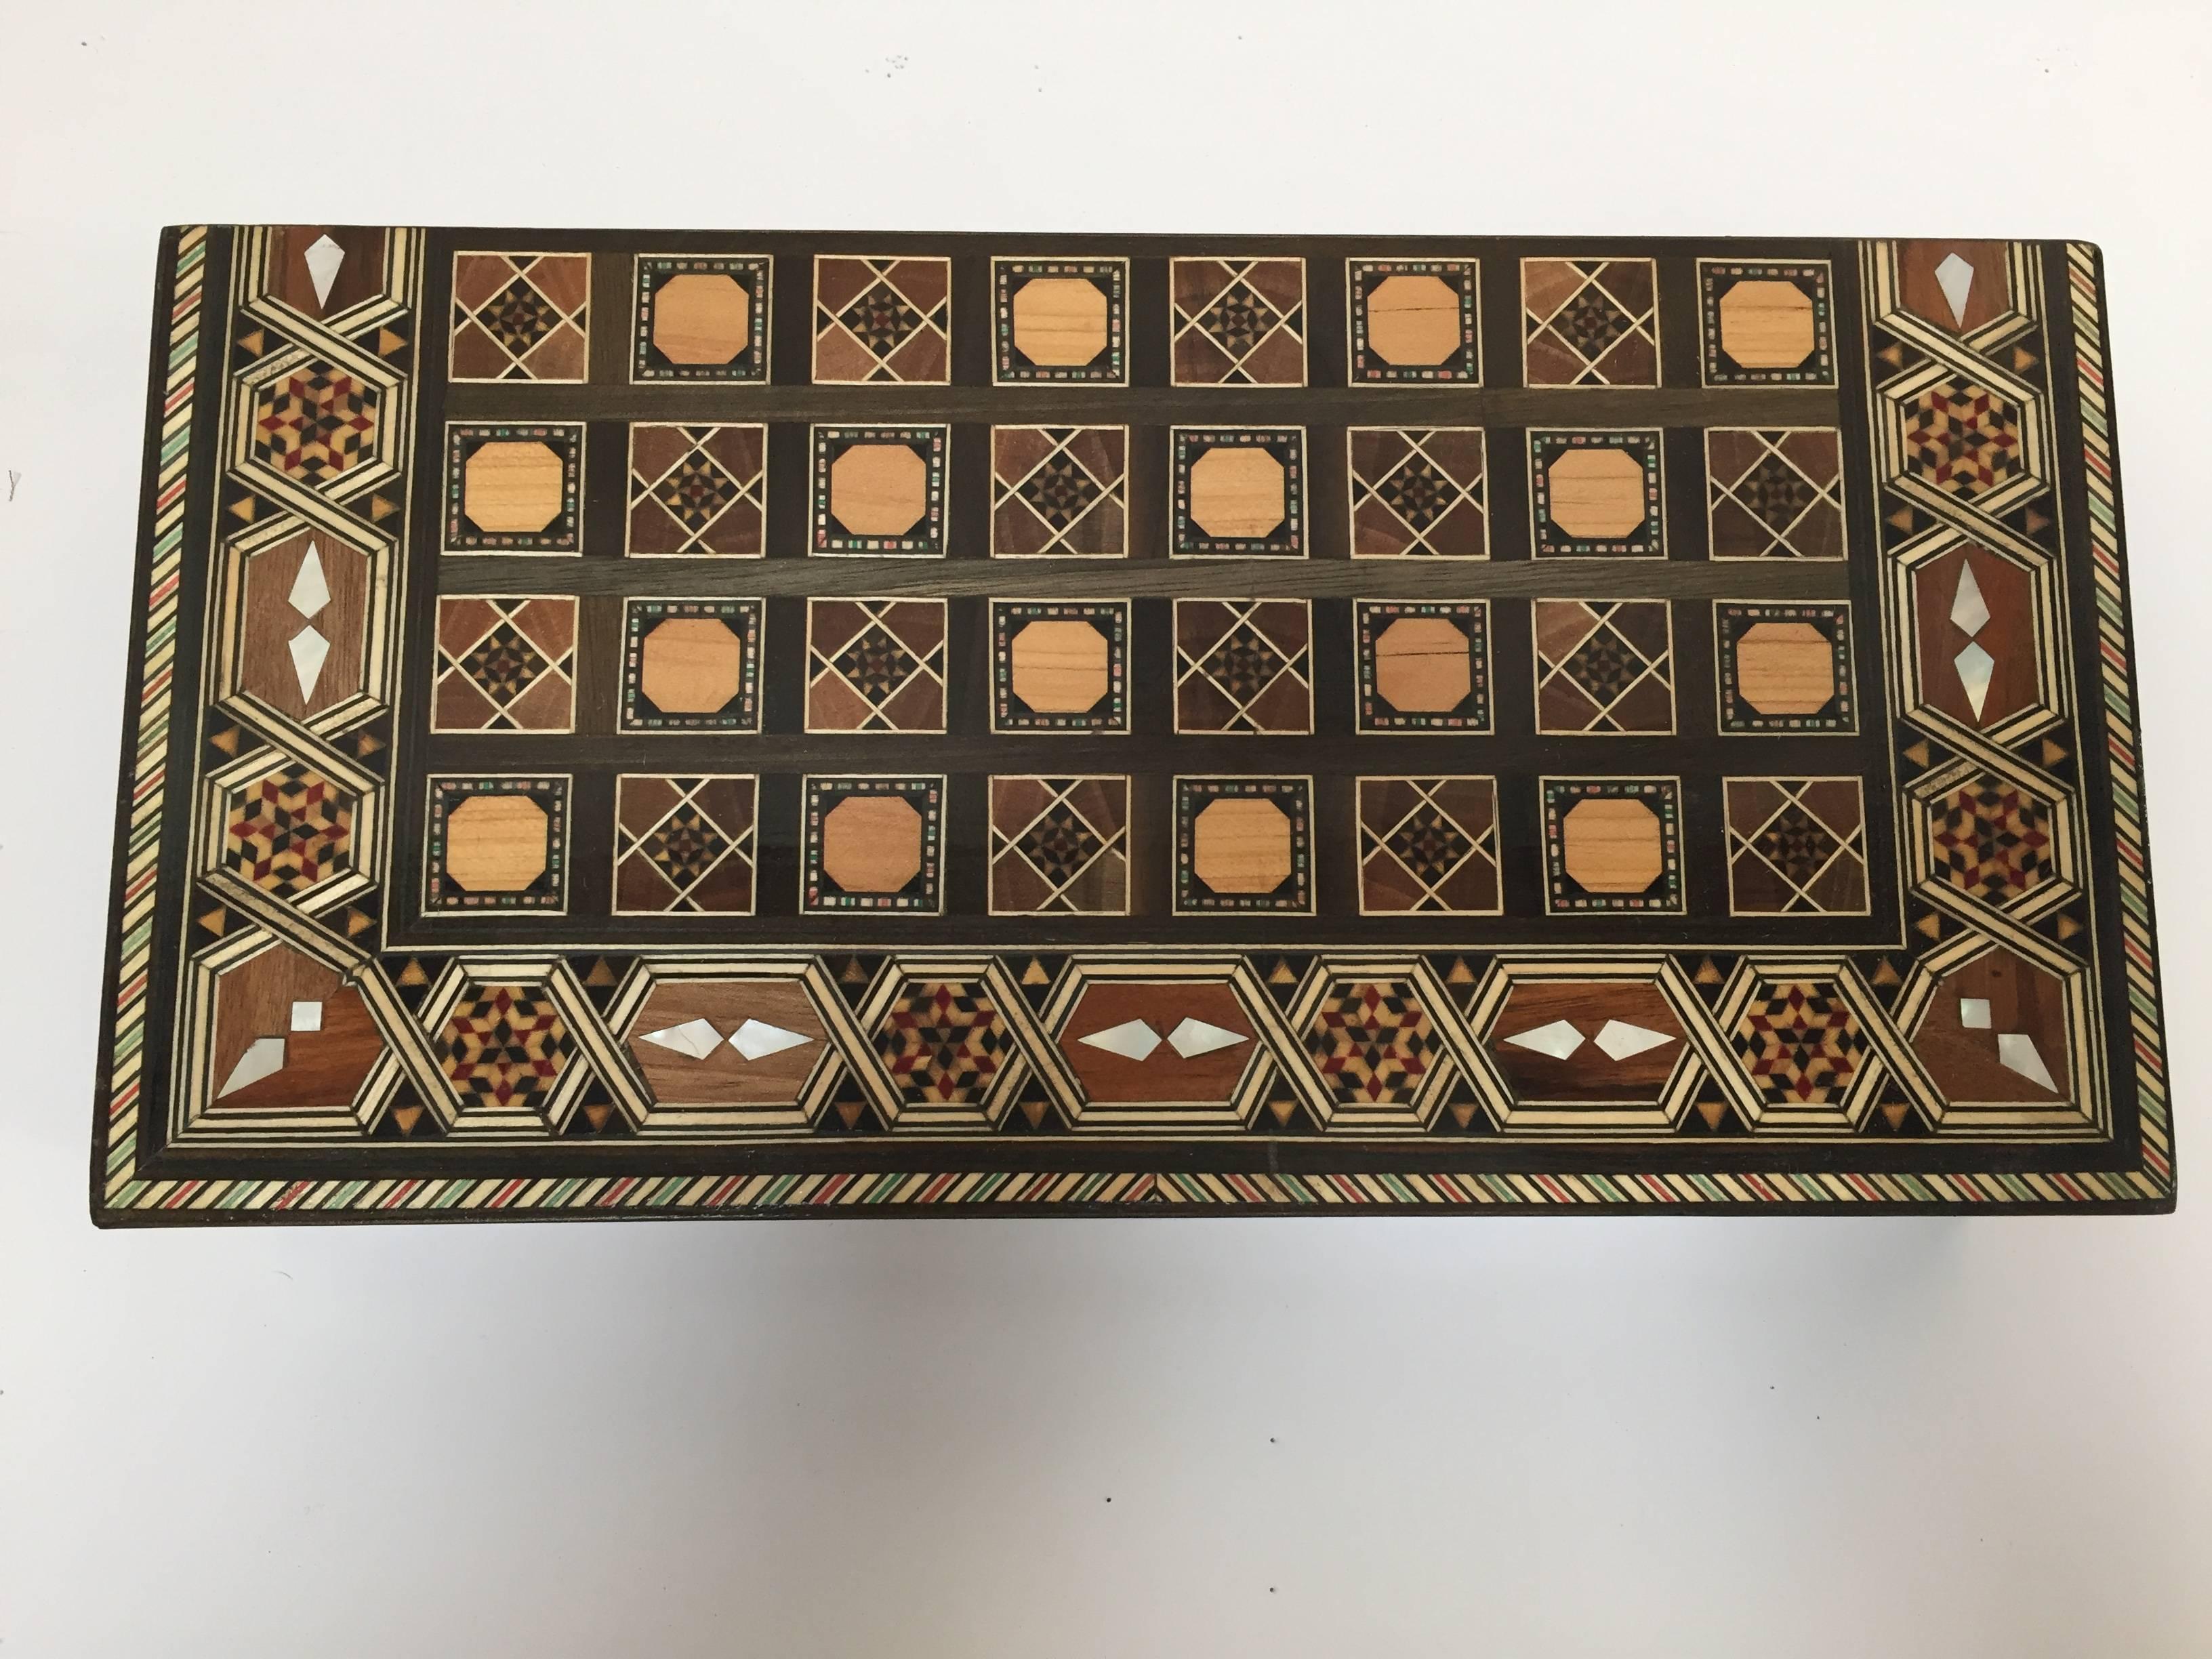 Syrian inlaid marquetry mosaic backgammon and chess game box.
Amazing craftsmanship the intricate marquetry fruitwood in mosaic Moorish geometric pattern and mother-of-pearl inlay makes it a true work of art.
Handcrafted in the Middle East,